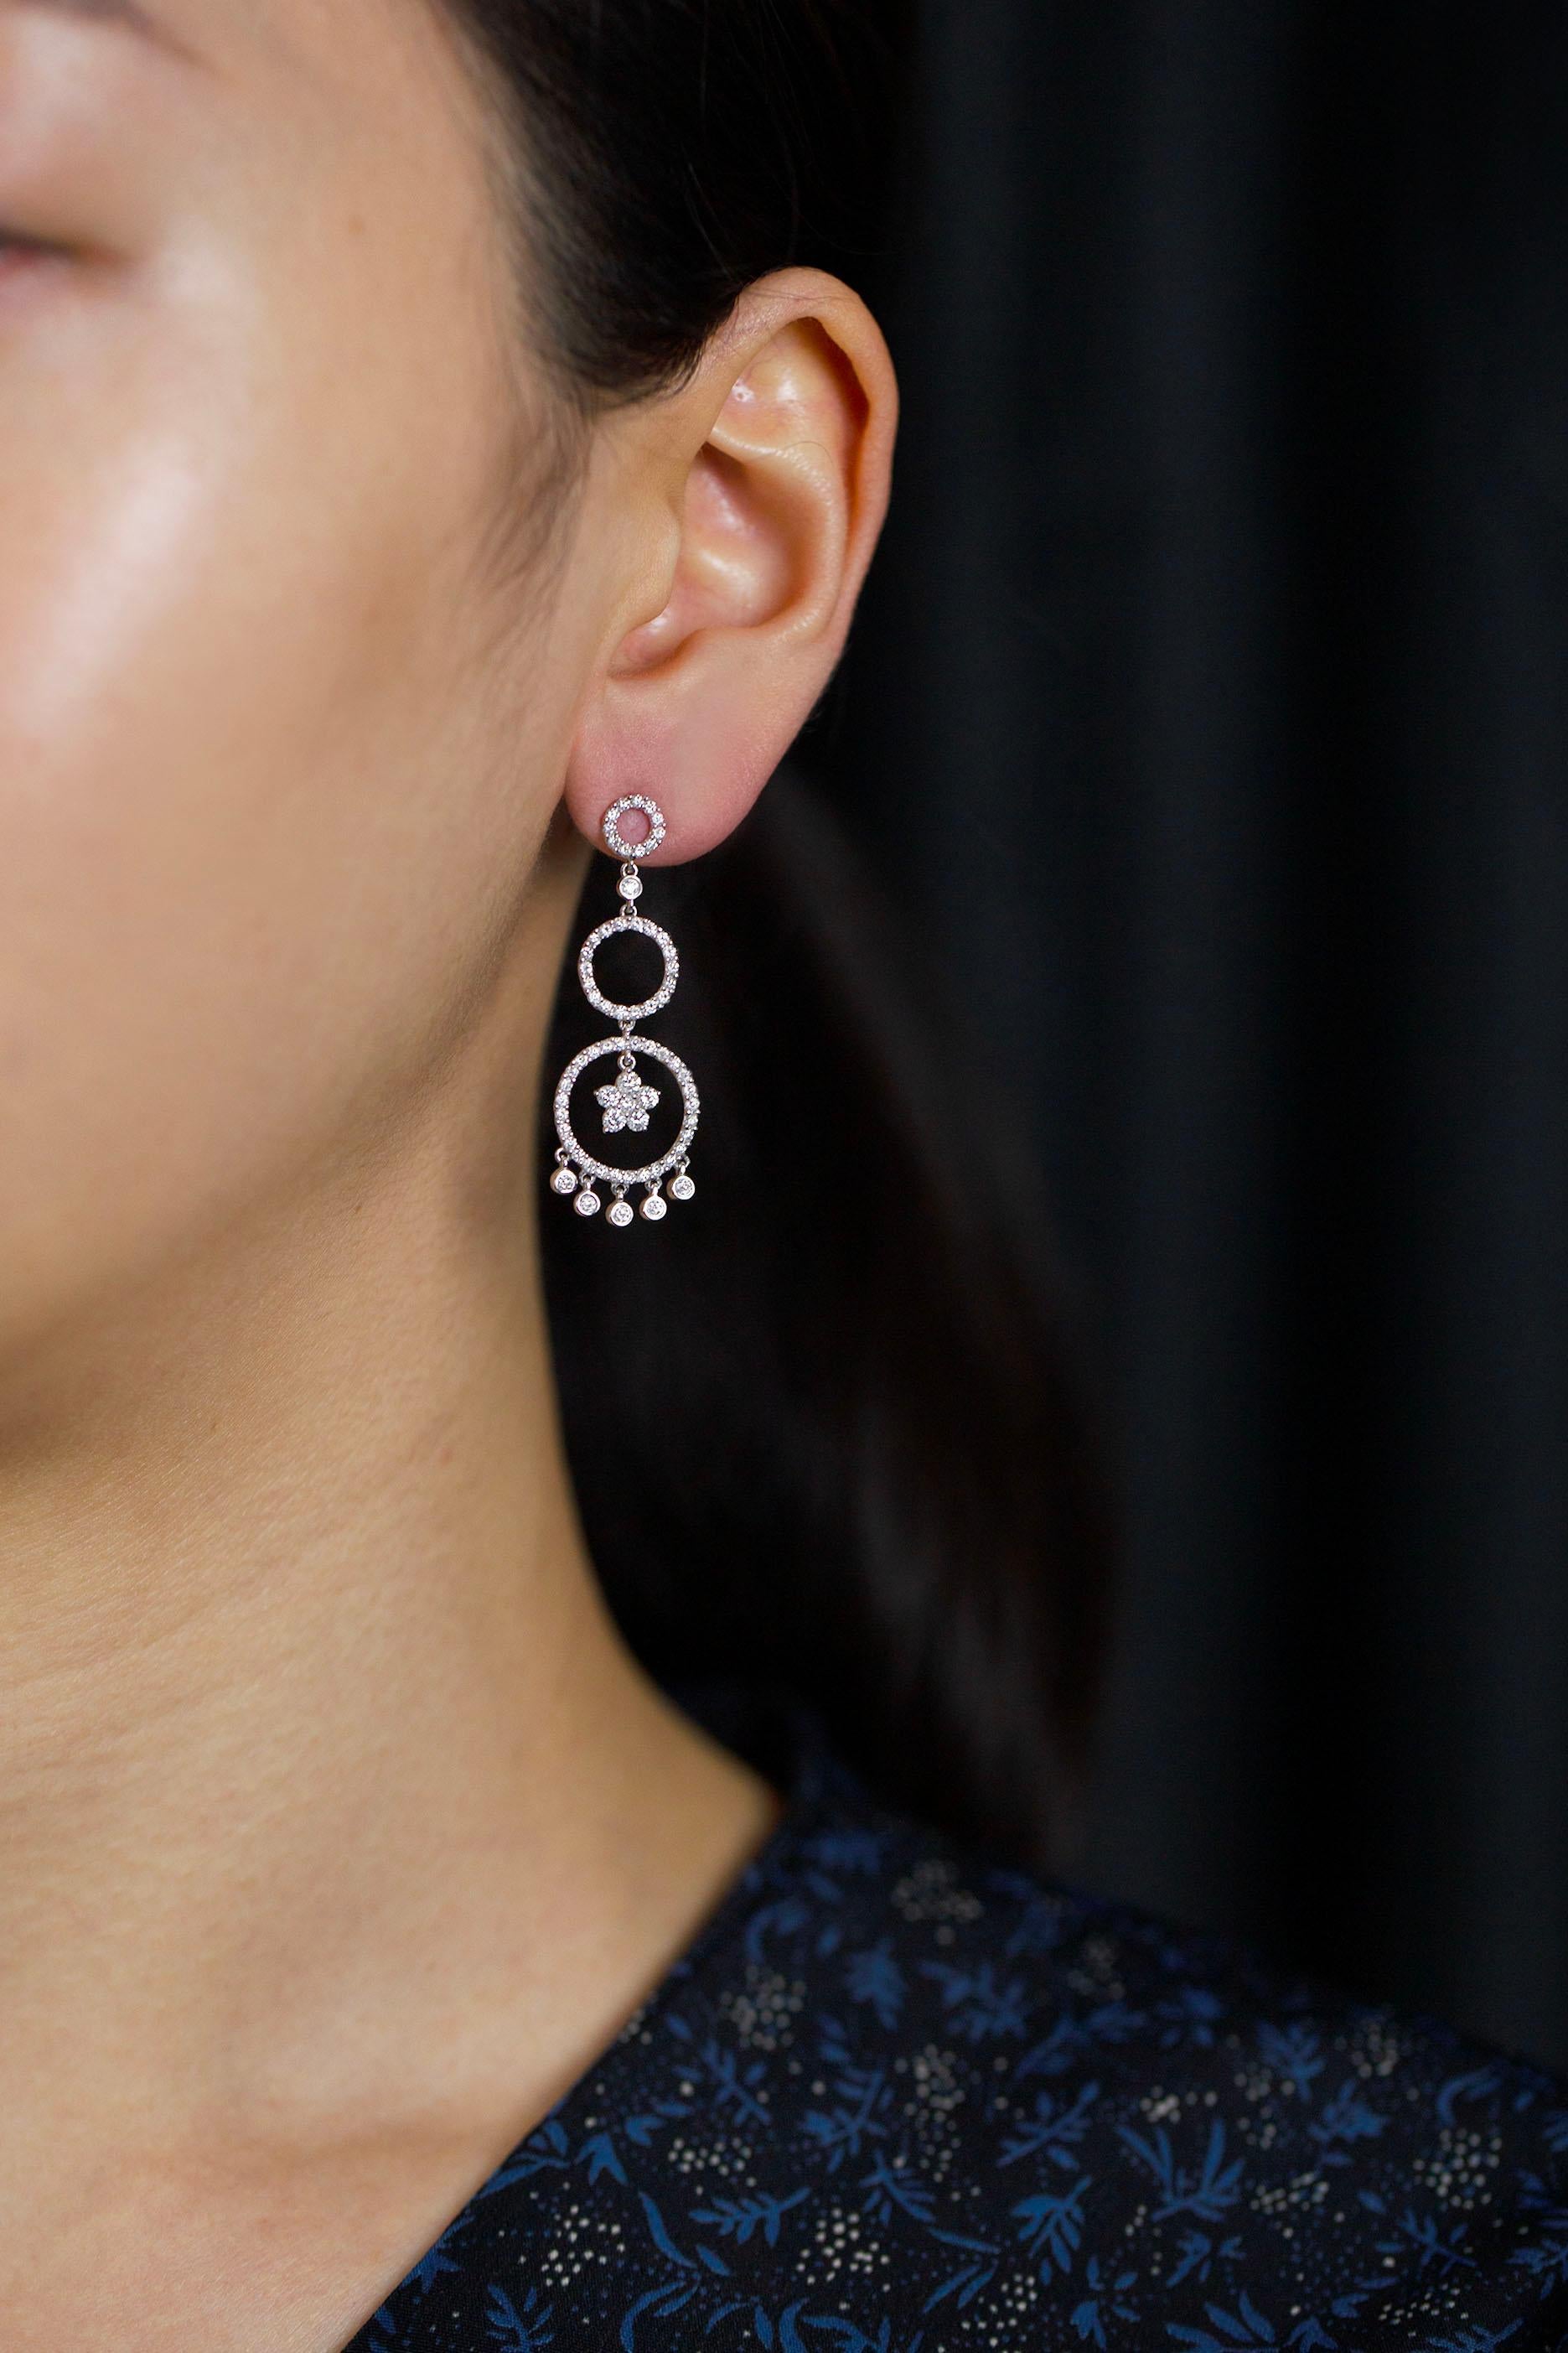 This stylish dangling earrings showcases three open-work, diamond encrusted circles that graduate in size as it drops down the earring mounted in a 18k white gold. On the last circle, the center designed to a floral motif and suspended below are 5